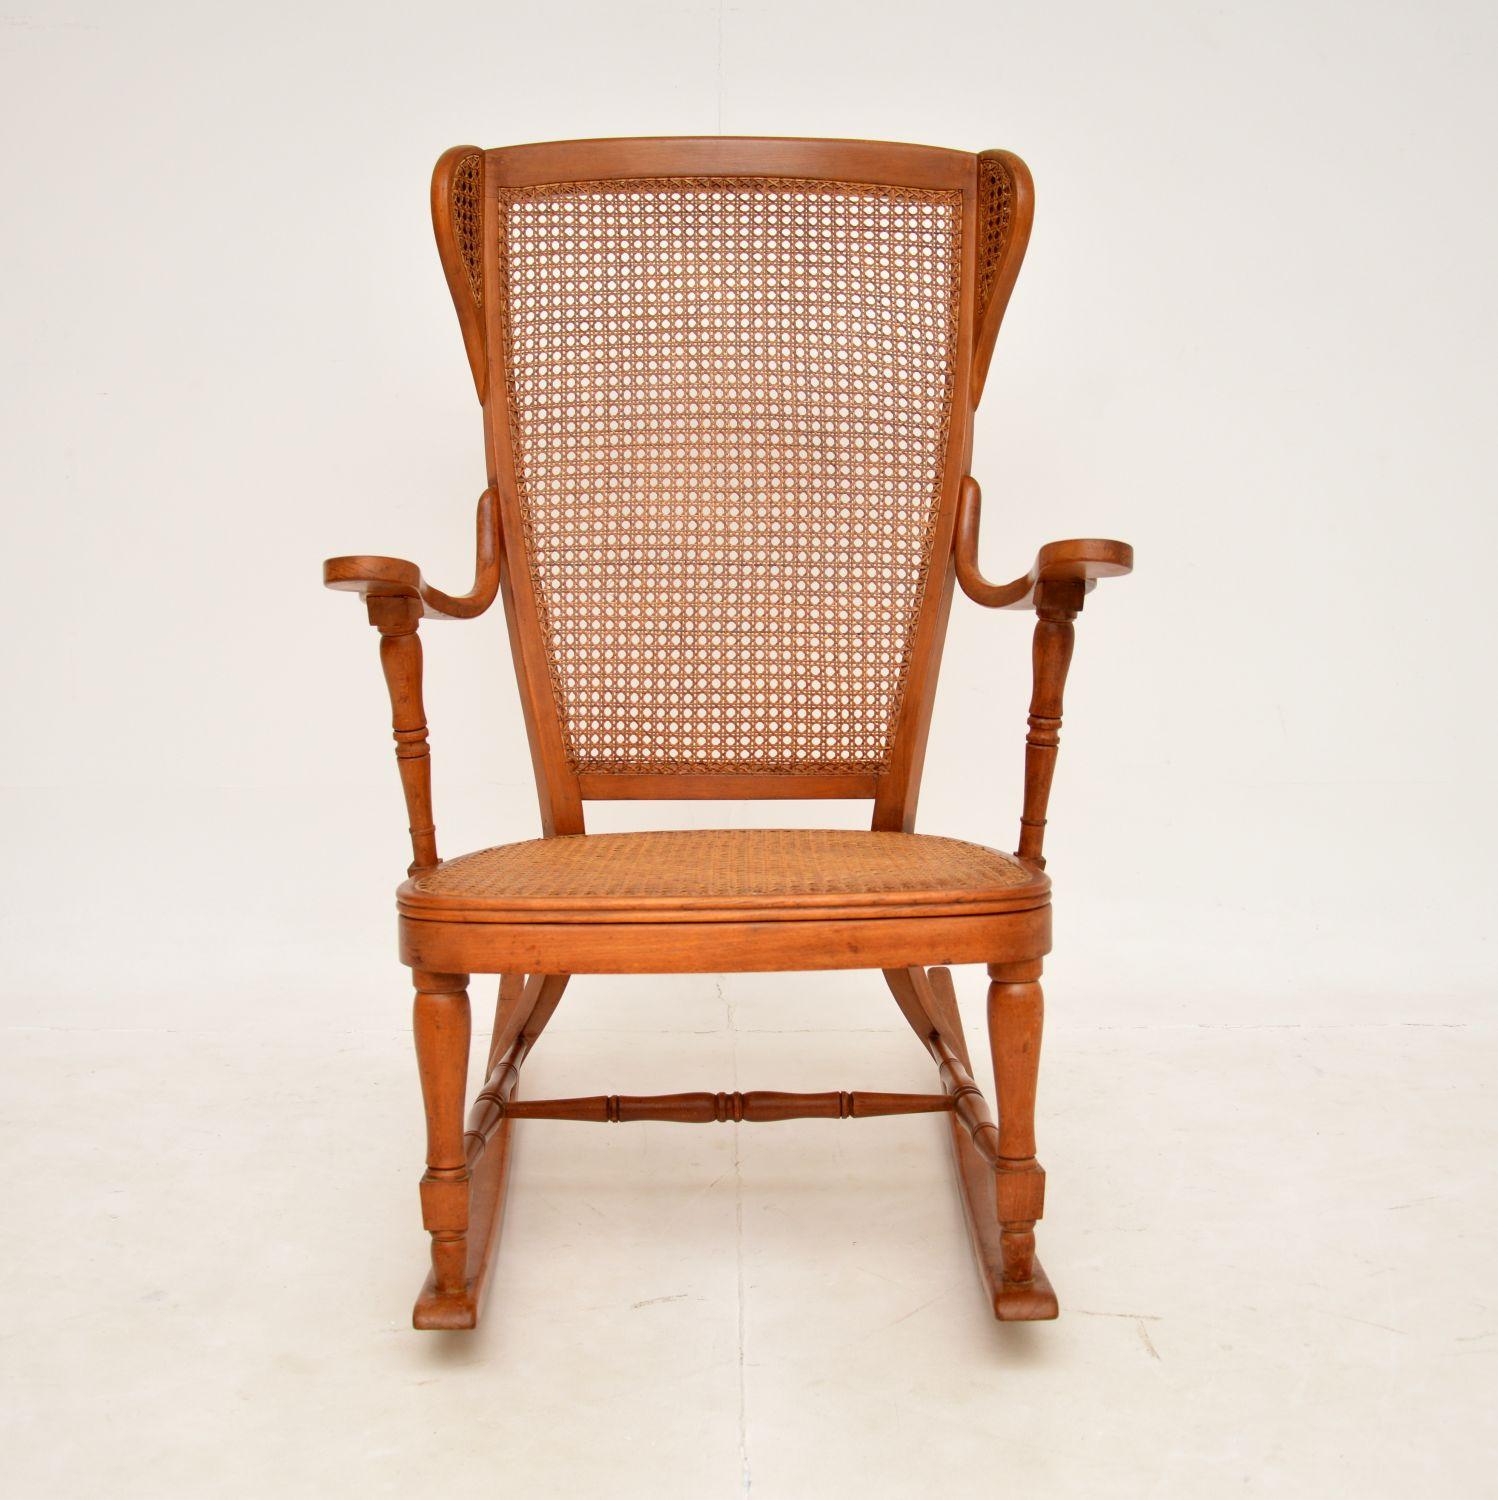 A lovely antique rocking chair, this was made in France and dates from around the 1900-1920 period.

It is beautifully made, the frame is a combination of turned and steam bent solid wood. The seat and back rest is caned, the back rest also has two